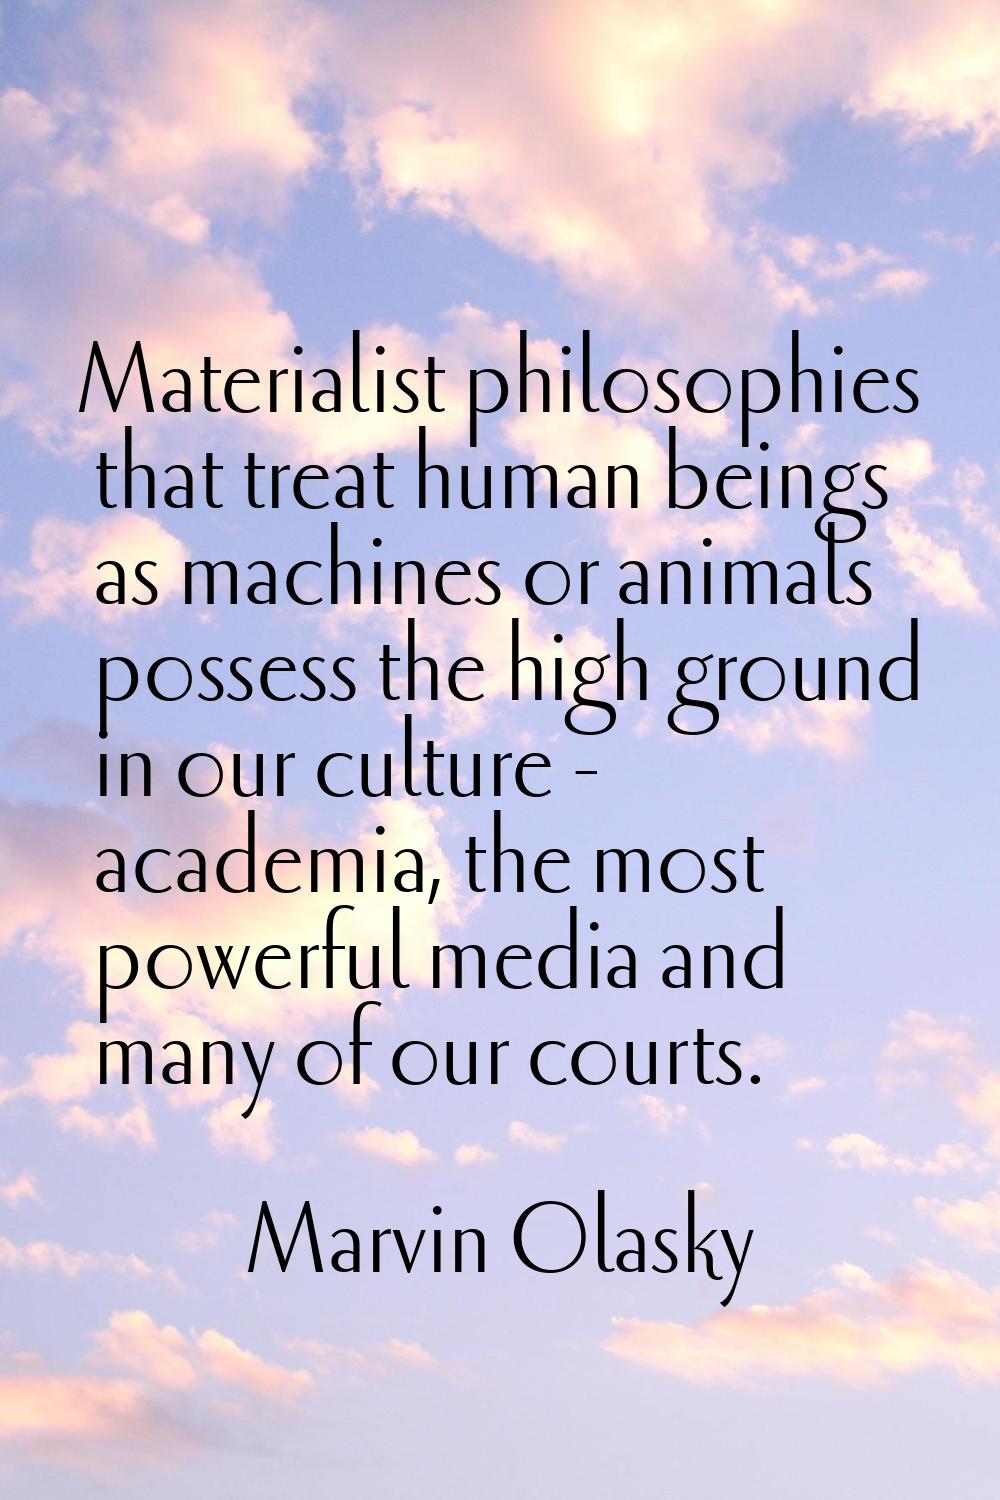 Materialist philosophies that treat human beings as machines or animals possess the high ground in 